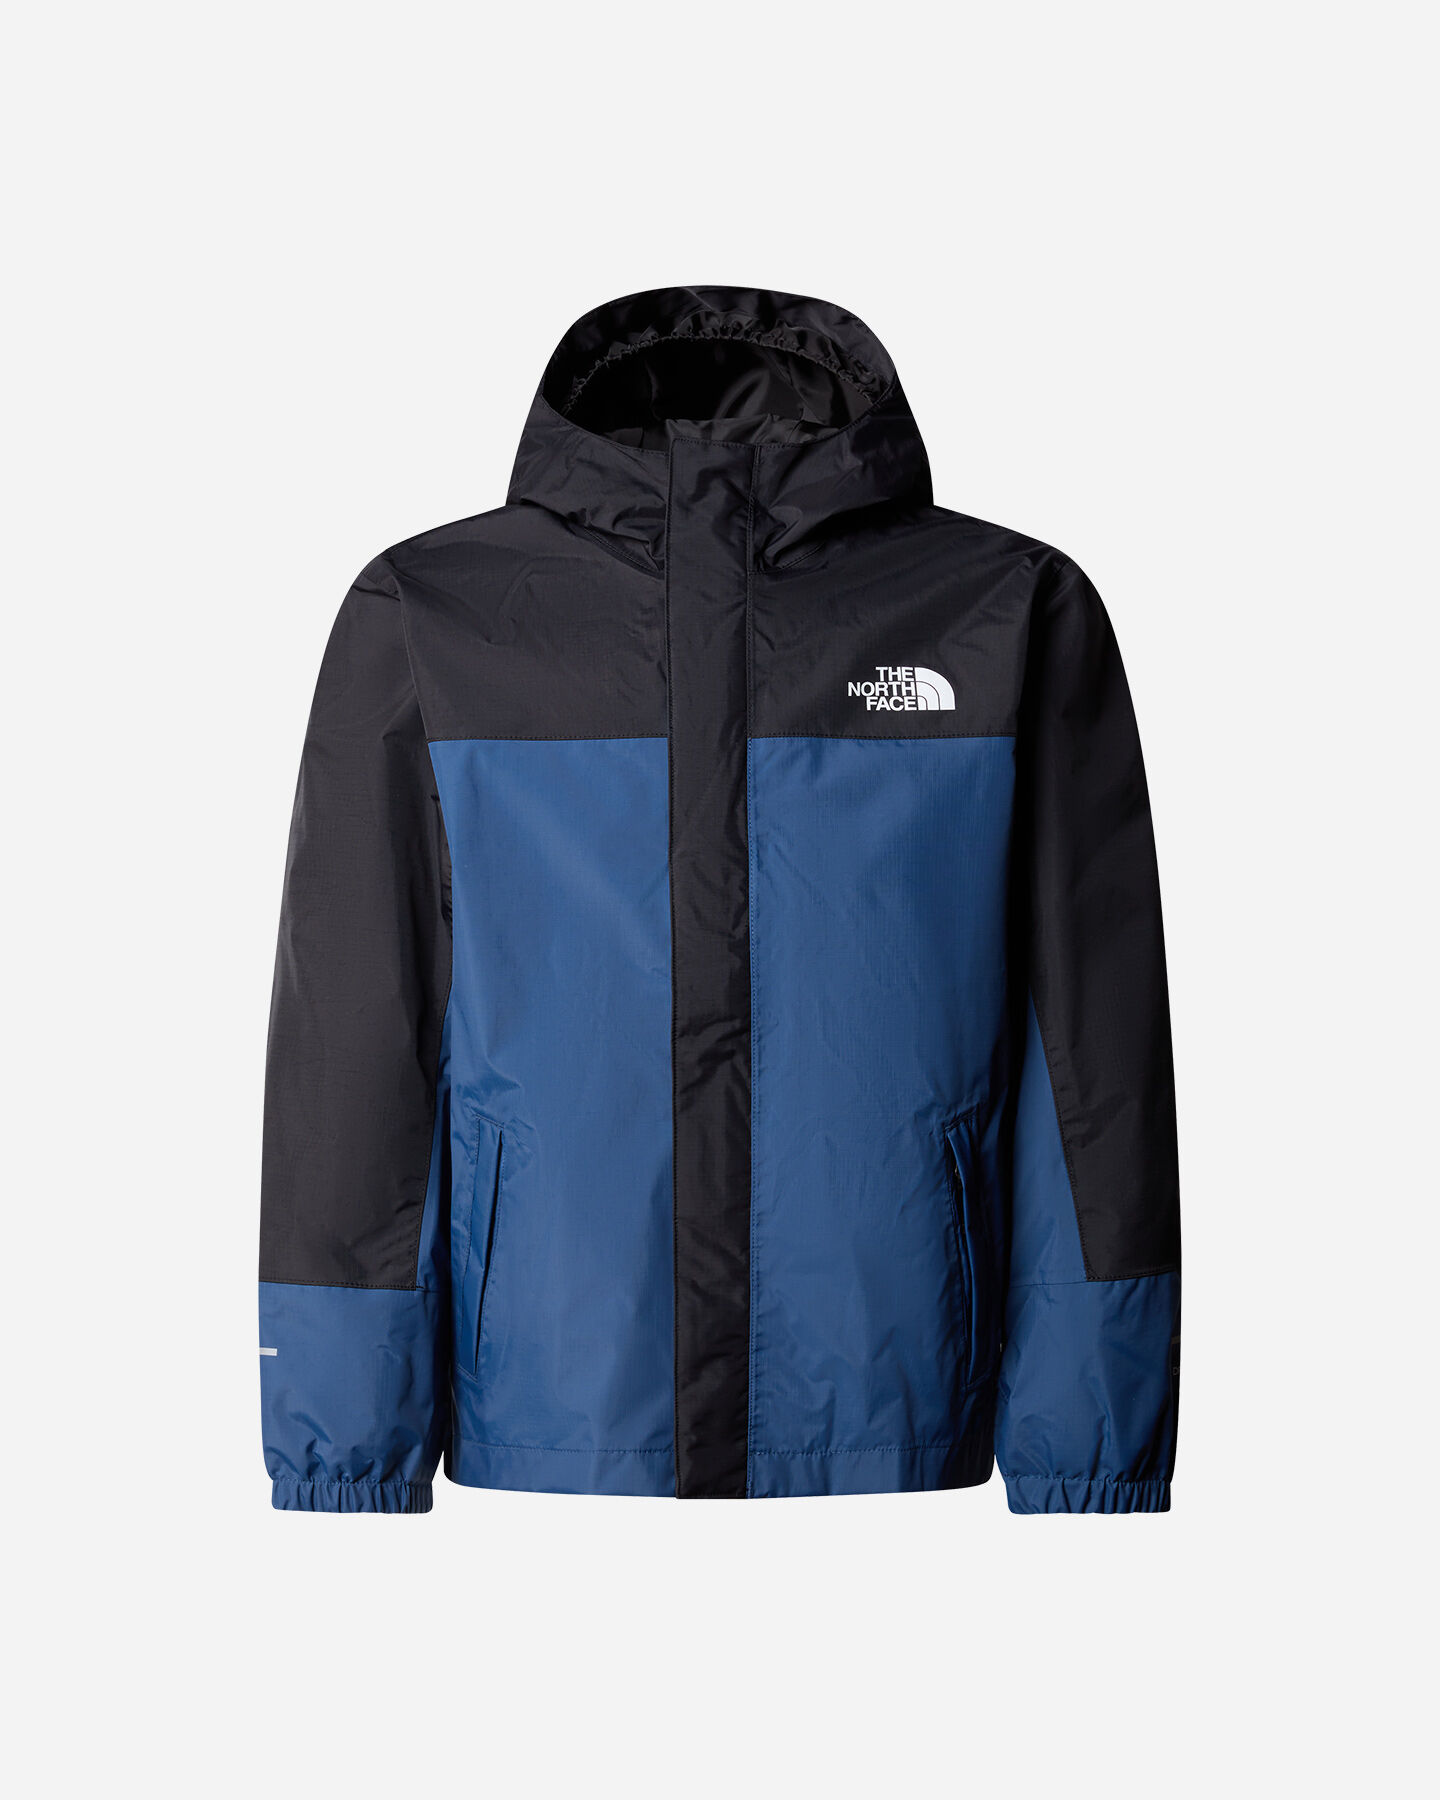  Giacca outdoor THE NORTH FACE ANTORA RAIN JR S5651426|HDC|M scatto 0